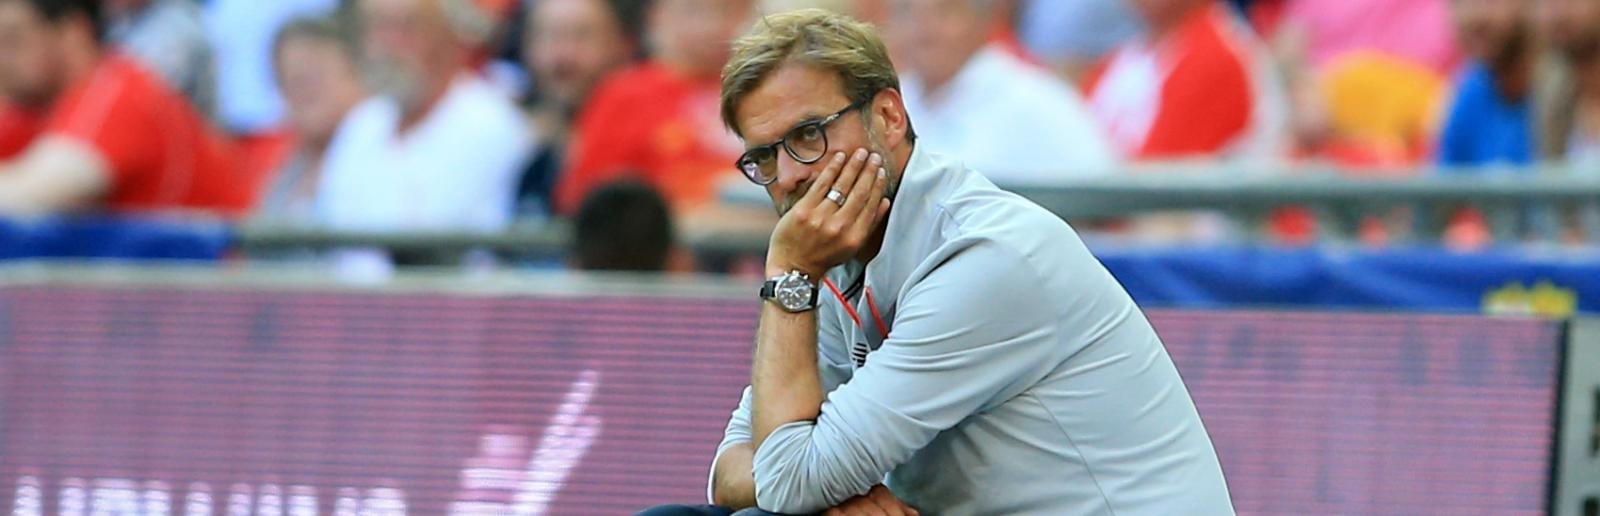 Jurgen Klopp must give these 3 Liverpool players a chance against Derby County